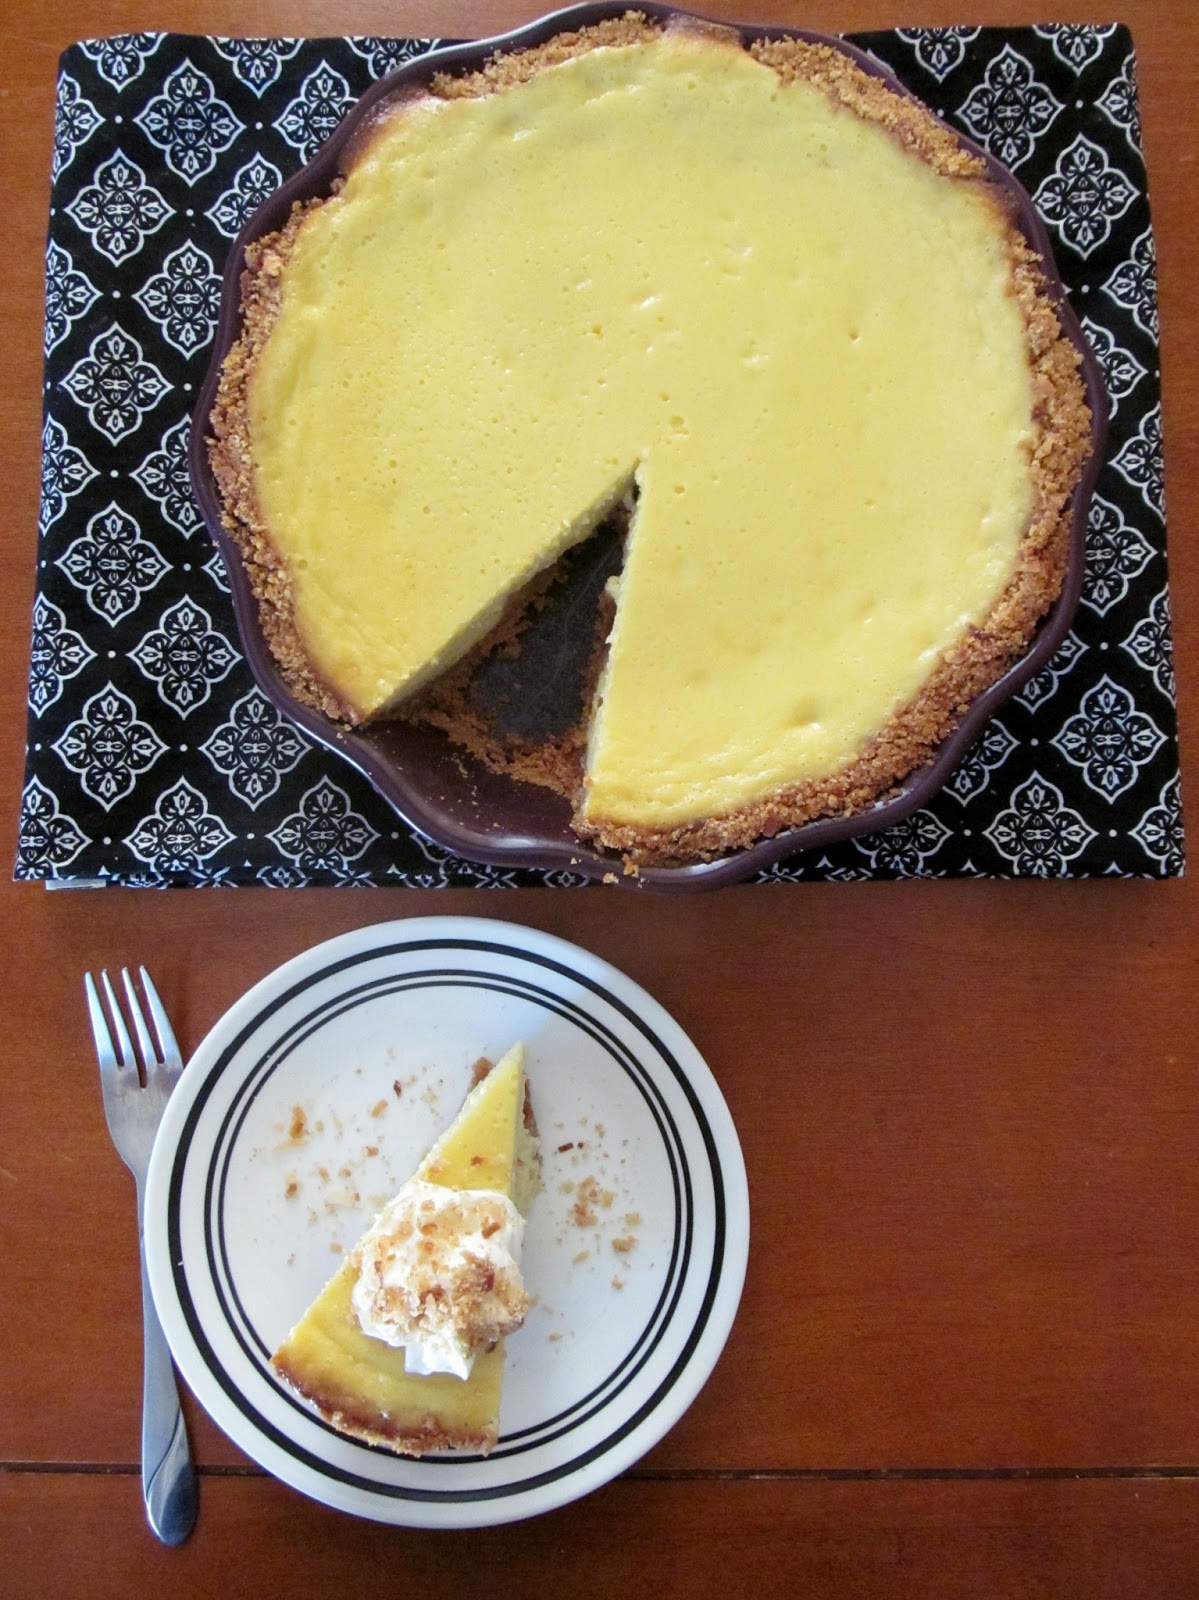 A Crafty Cook: Coconut Key Lime Pie with Toasted Coconut Crust